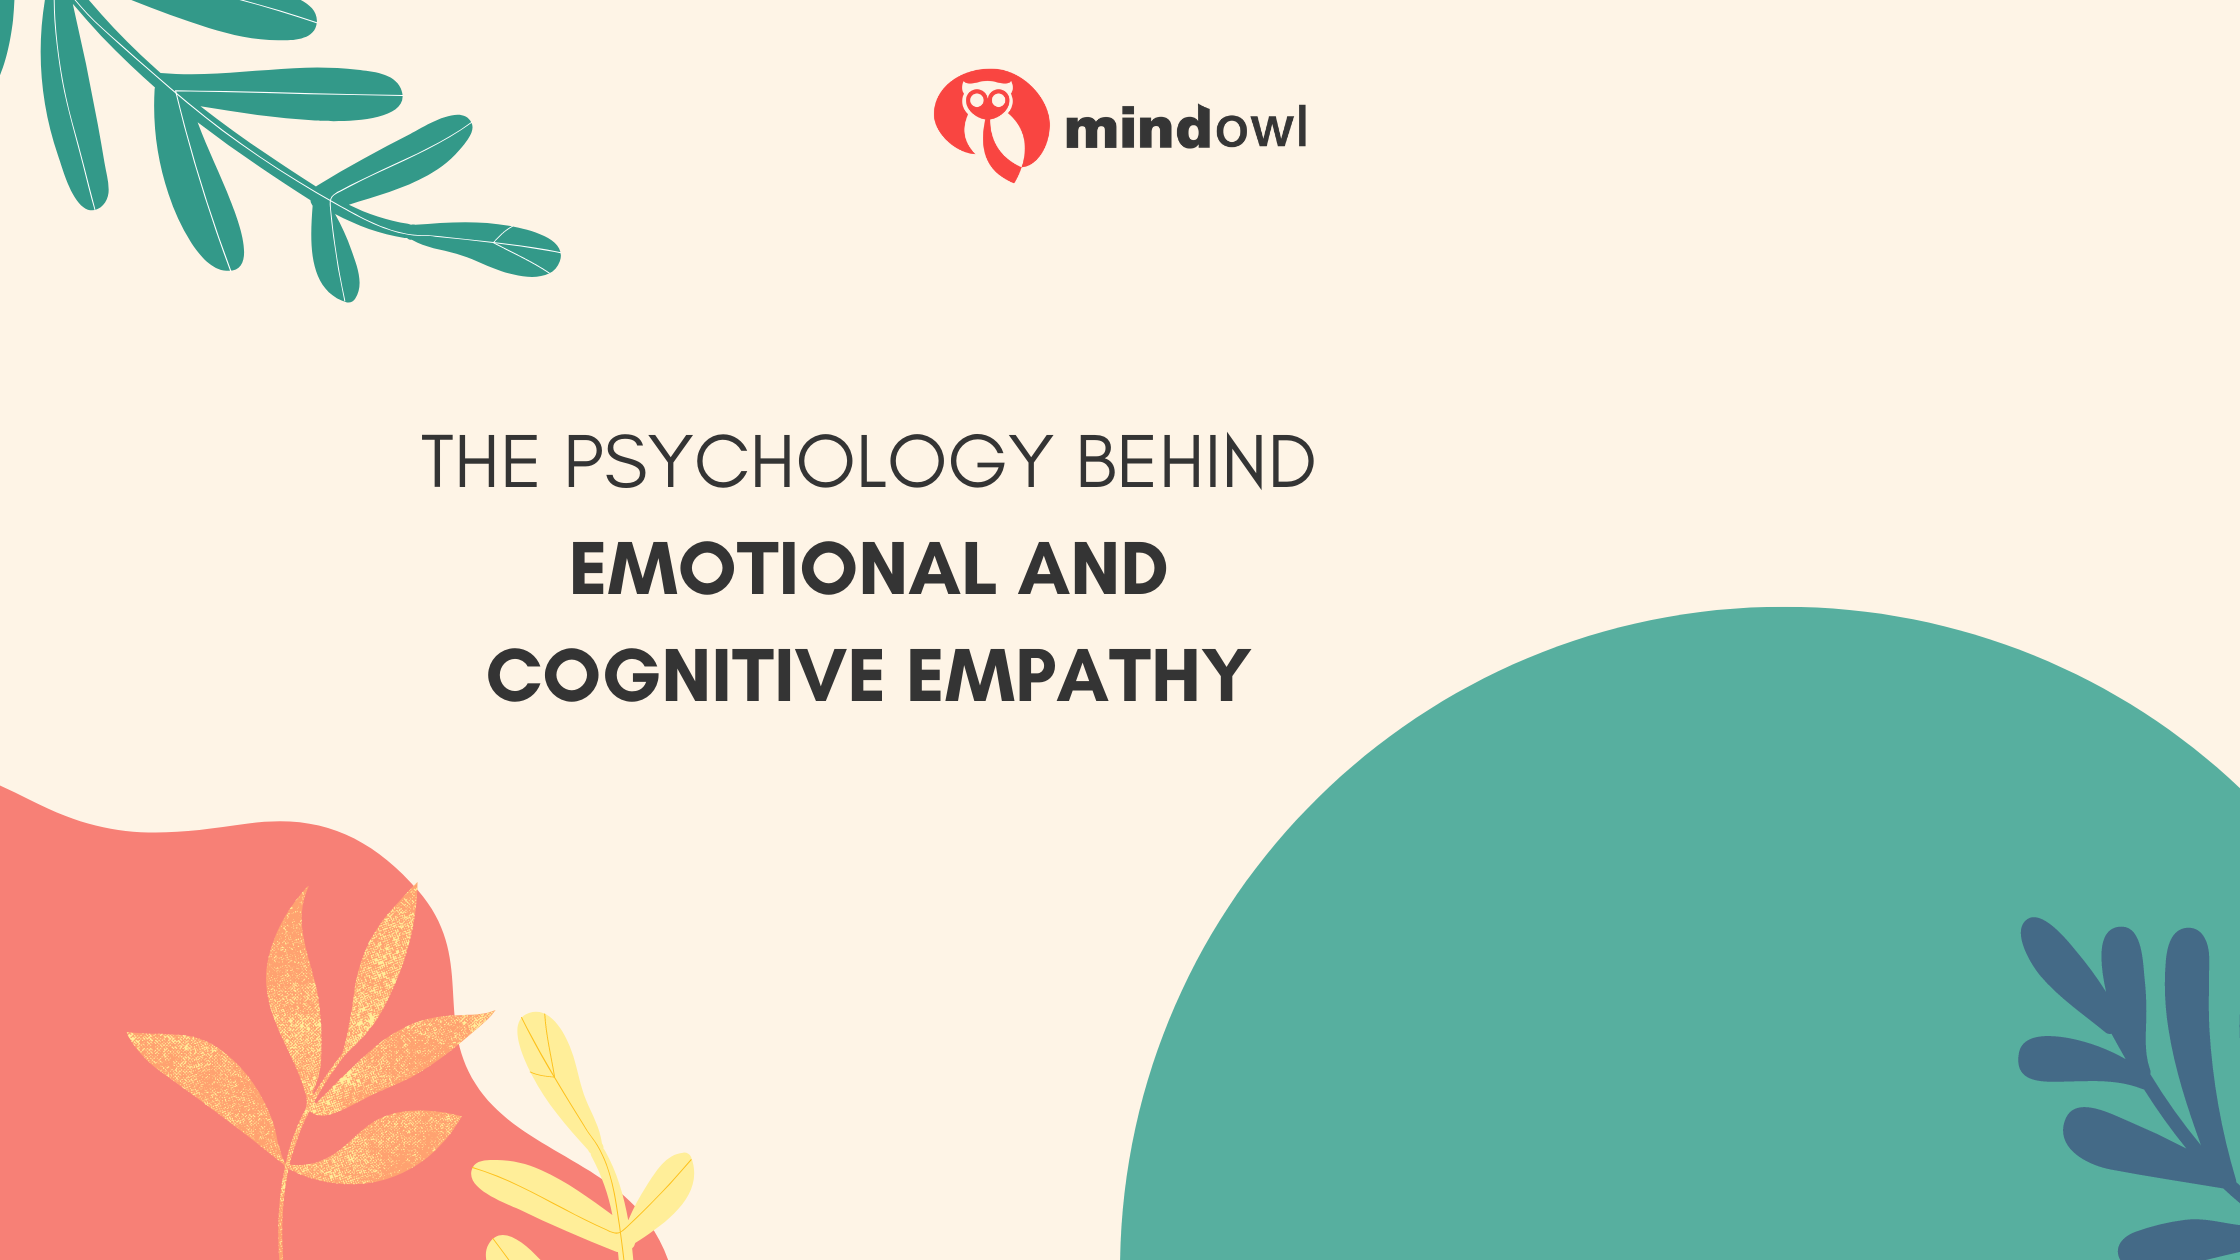 The Psychology Behind Emotional and Cognitive Empathy